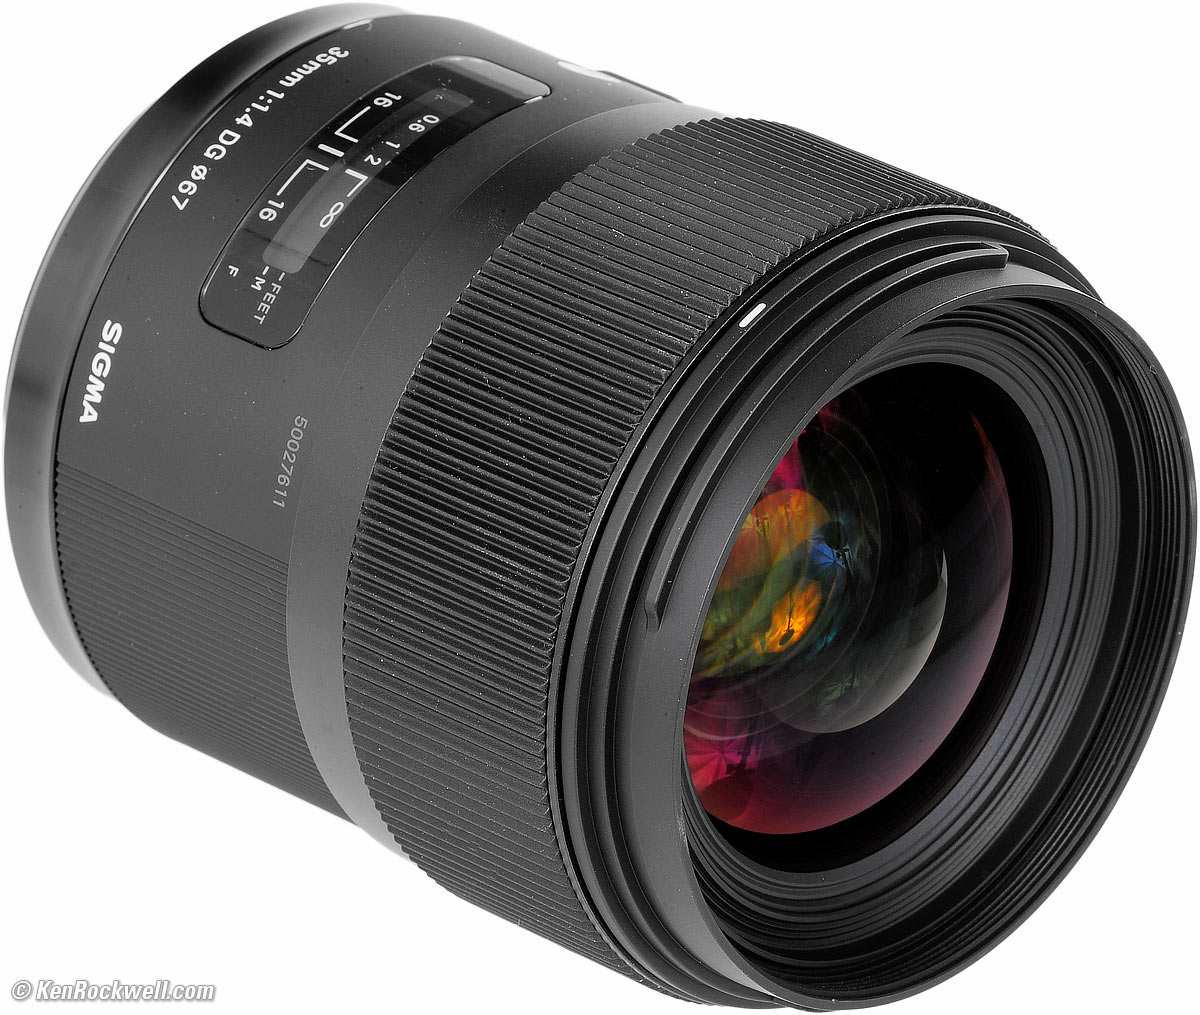 Sigma 35mm f/1.4 Review